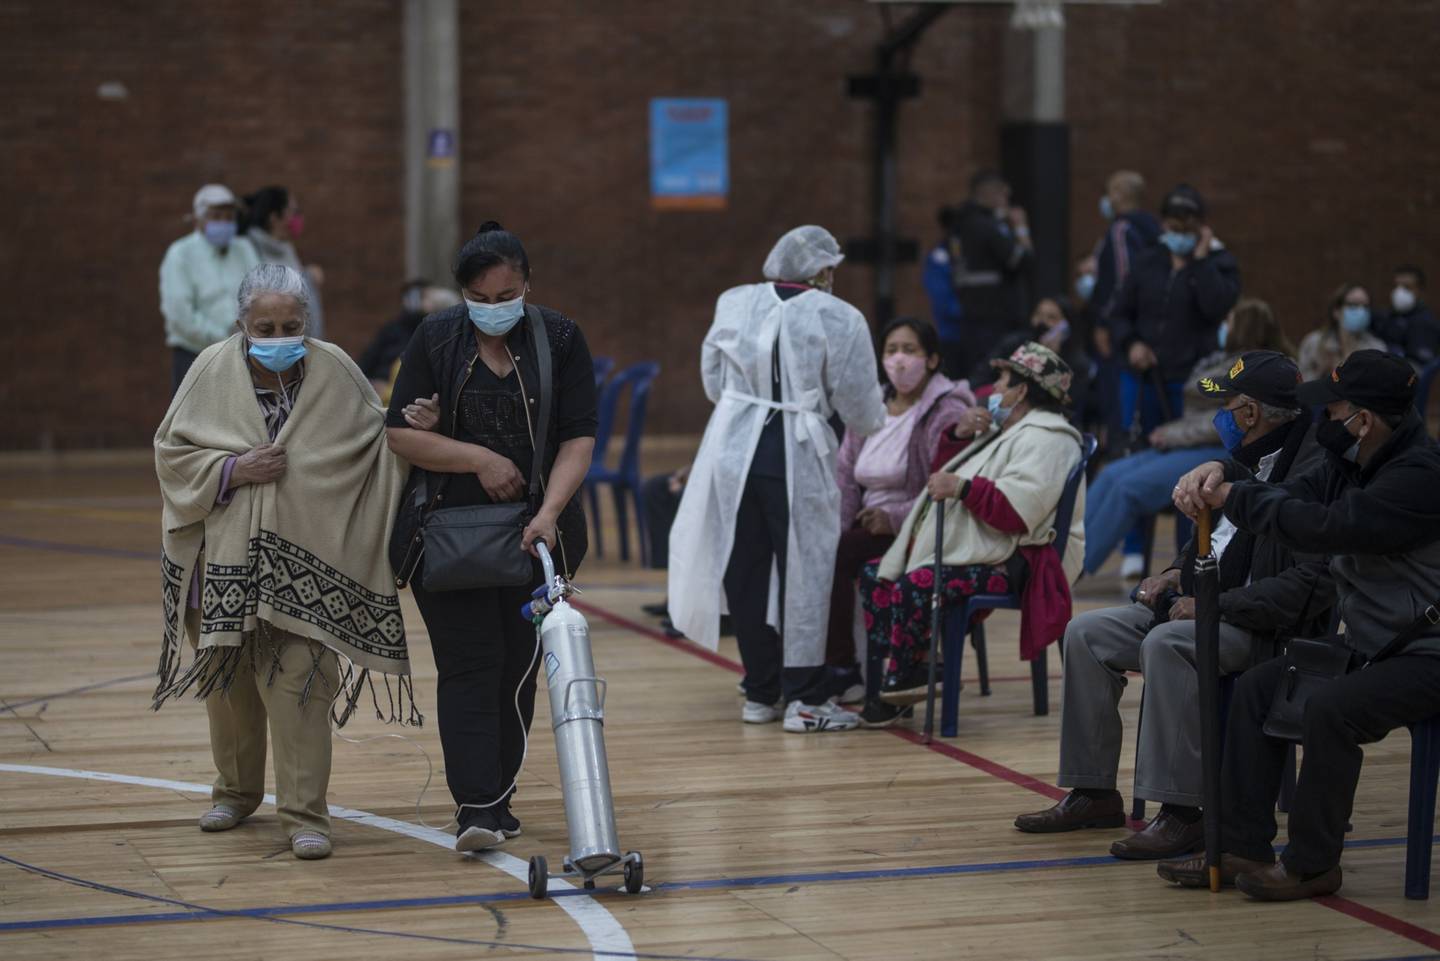 A patient using an oxygen tank leaves an  observation area after receiving a Covid-19 vaccine at the Cayetano Canizares Coliseum in Bogota, Colombia, on Friday, March 12, 2021. Colombia is lagging behind its South American neighbors with only 0.3% of the population vaccinated, even as the country sees the second-highest number of infections on the continent. Photographer: Ivan Valencia/Bloomberg